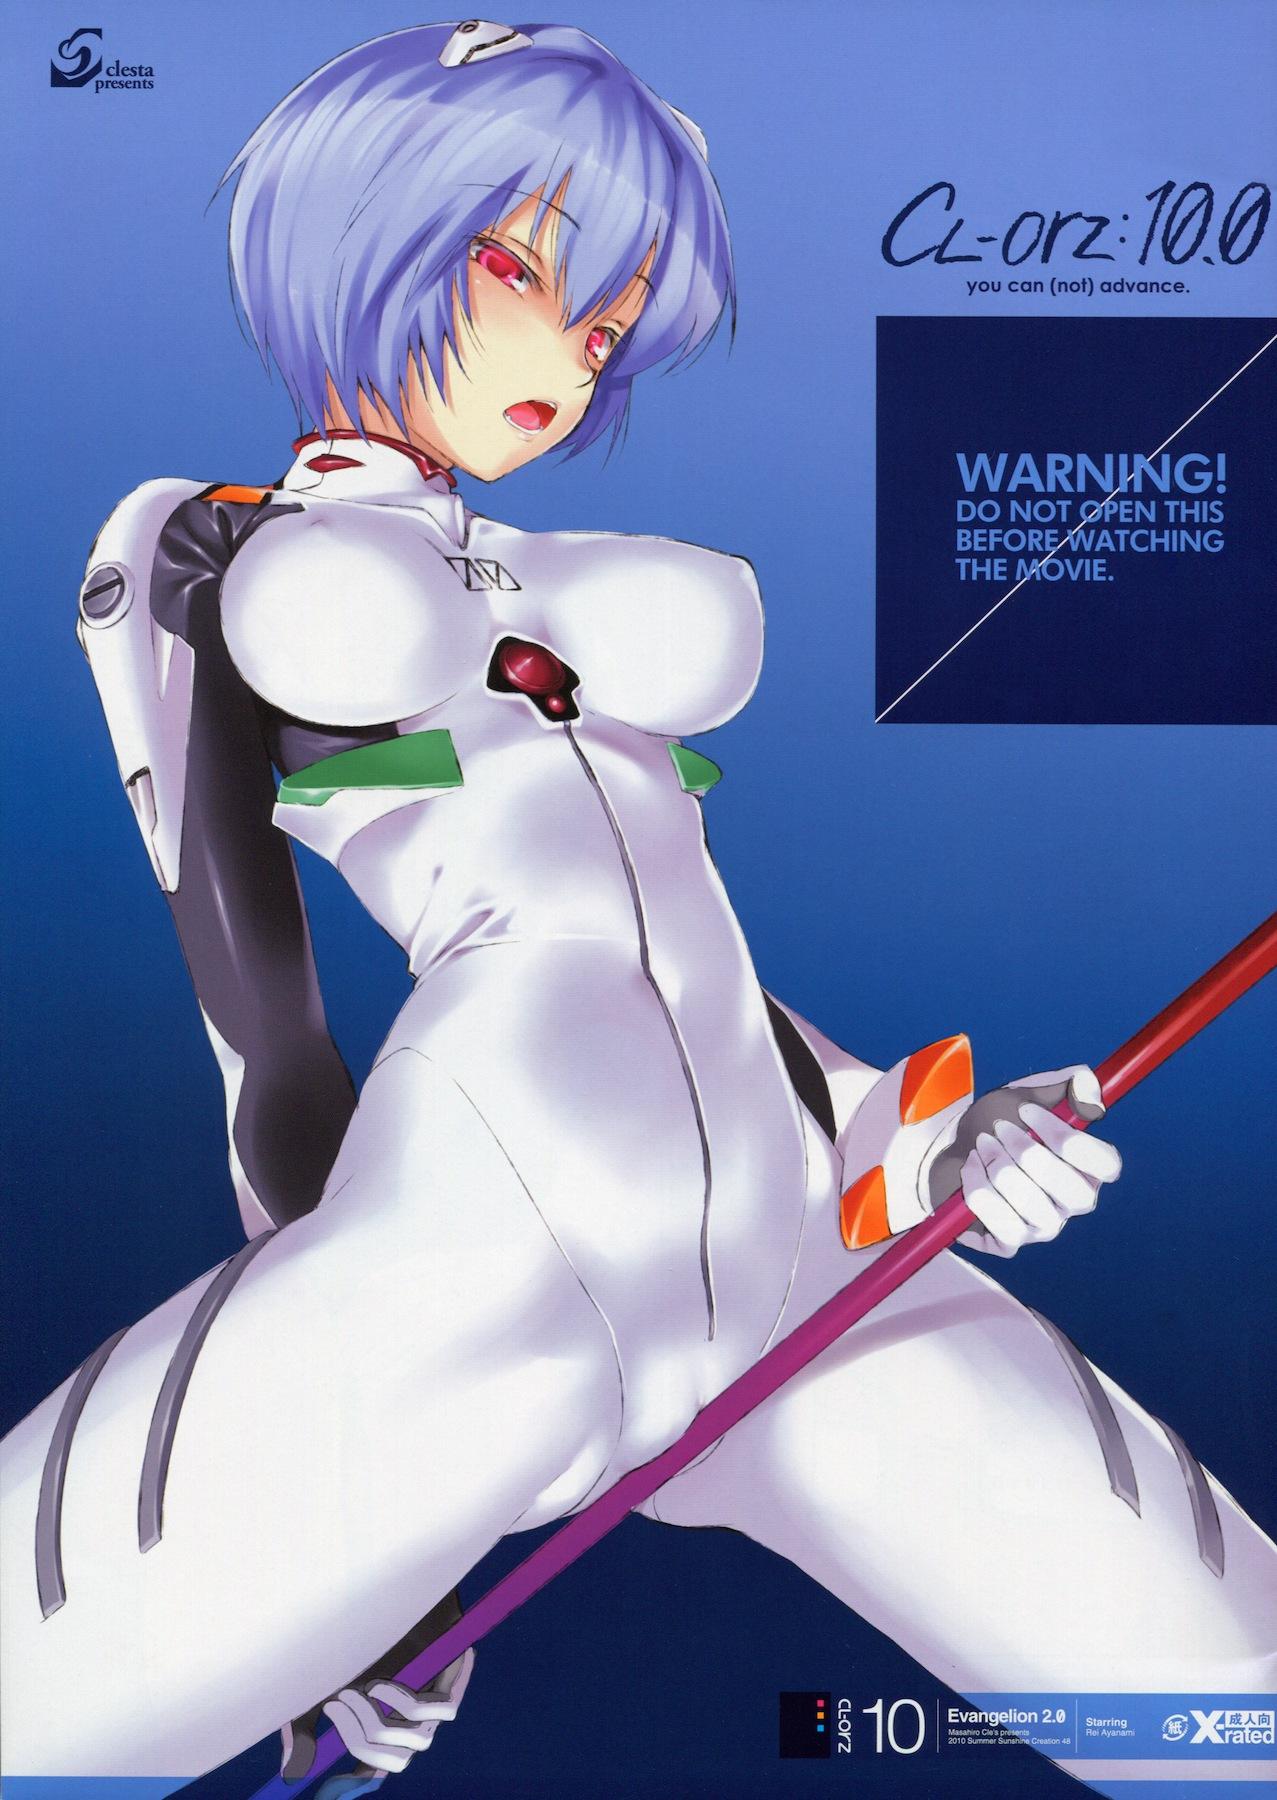 (SC48) [Clesta (Cle Masahiro)] CL-orz: 10.0 - you can (not) advance (Rebuild of Evangelion) [English] {doujin-moe.us} [Decensored] 0